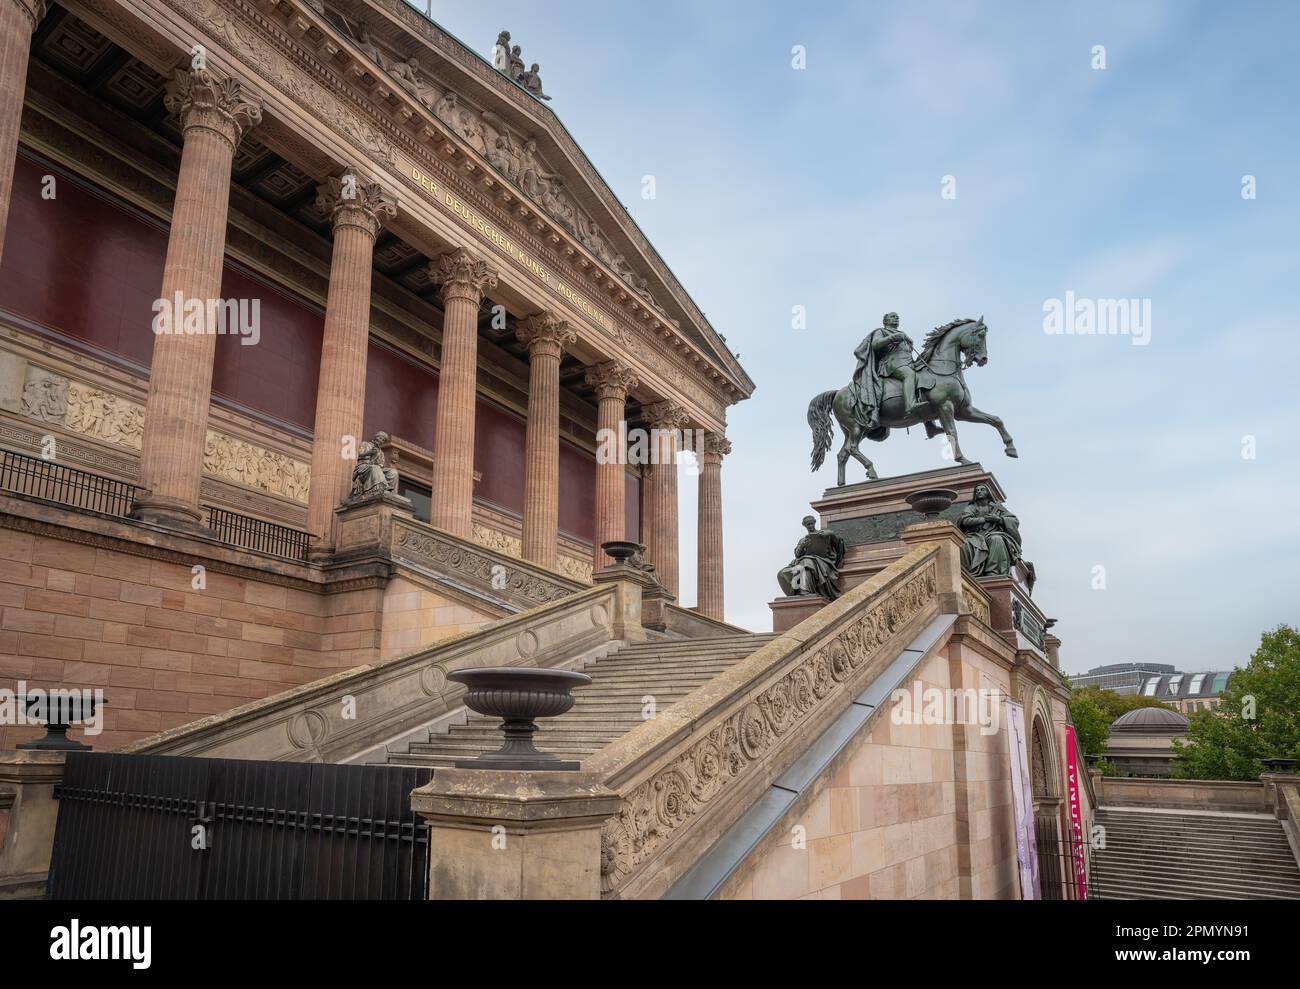 Friedrich Wilhelm IV Statue in front of Alte Nationalgalerie (Old National Gallery) at Museum Island - Berlin, Germany Stock Photo